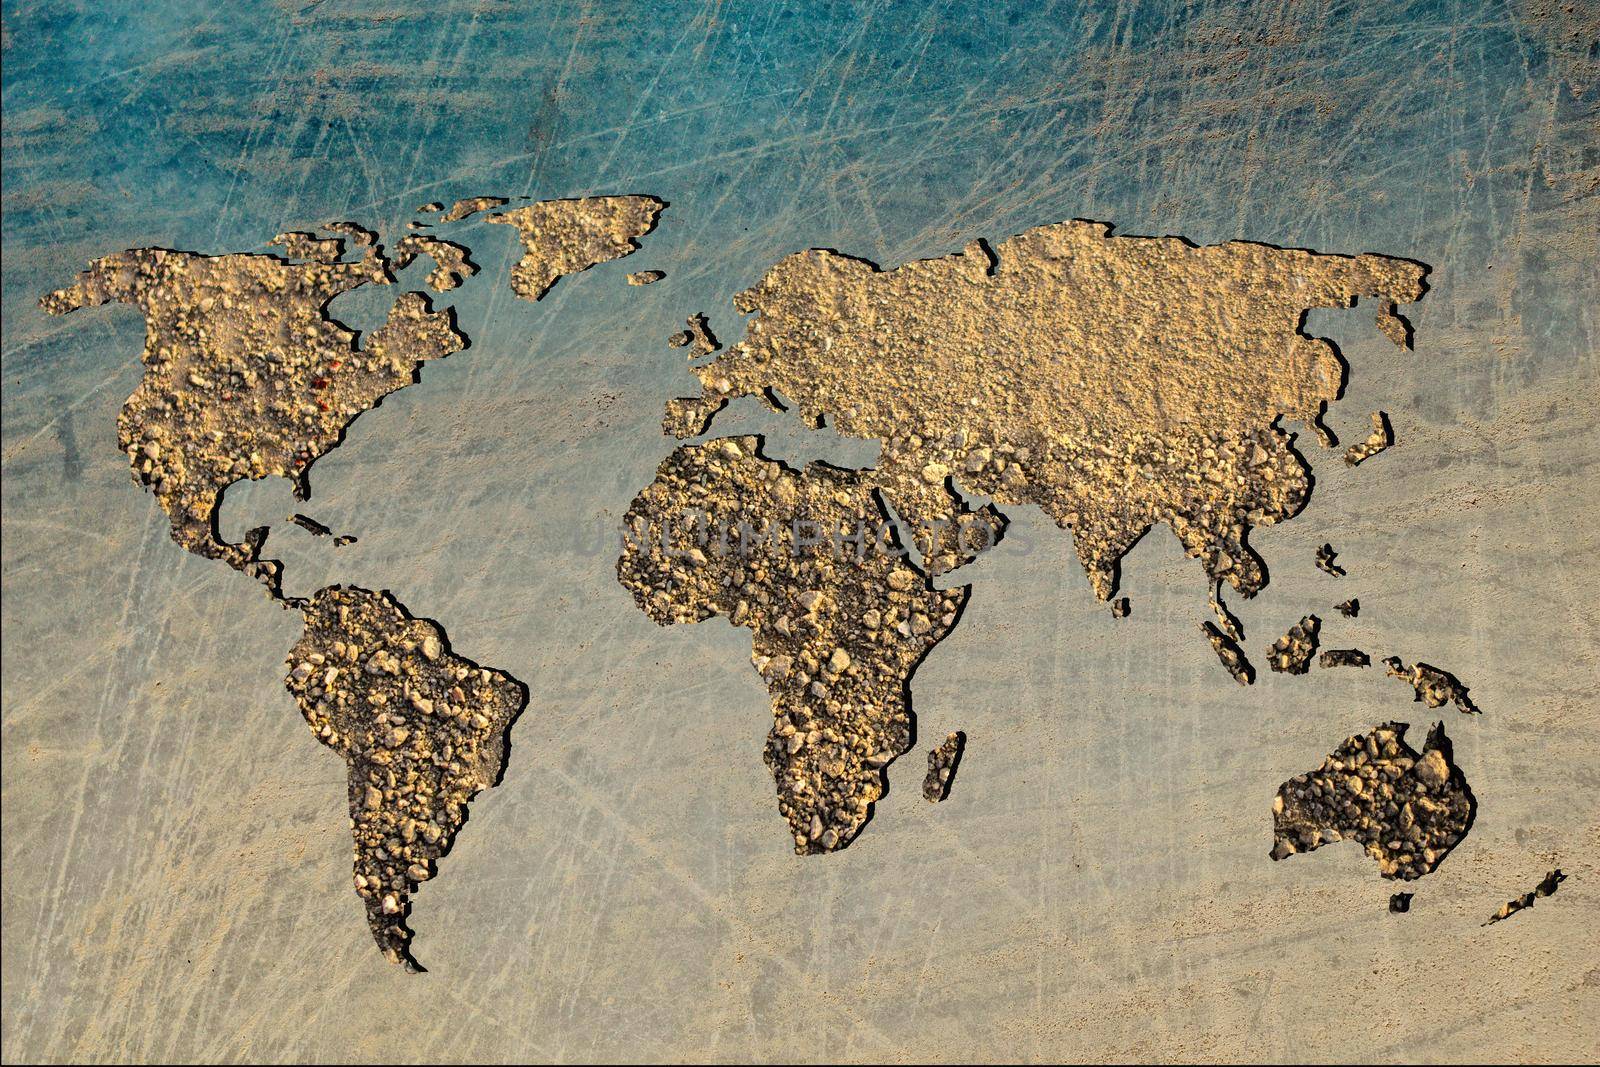 Roughly outlined world map with white background